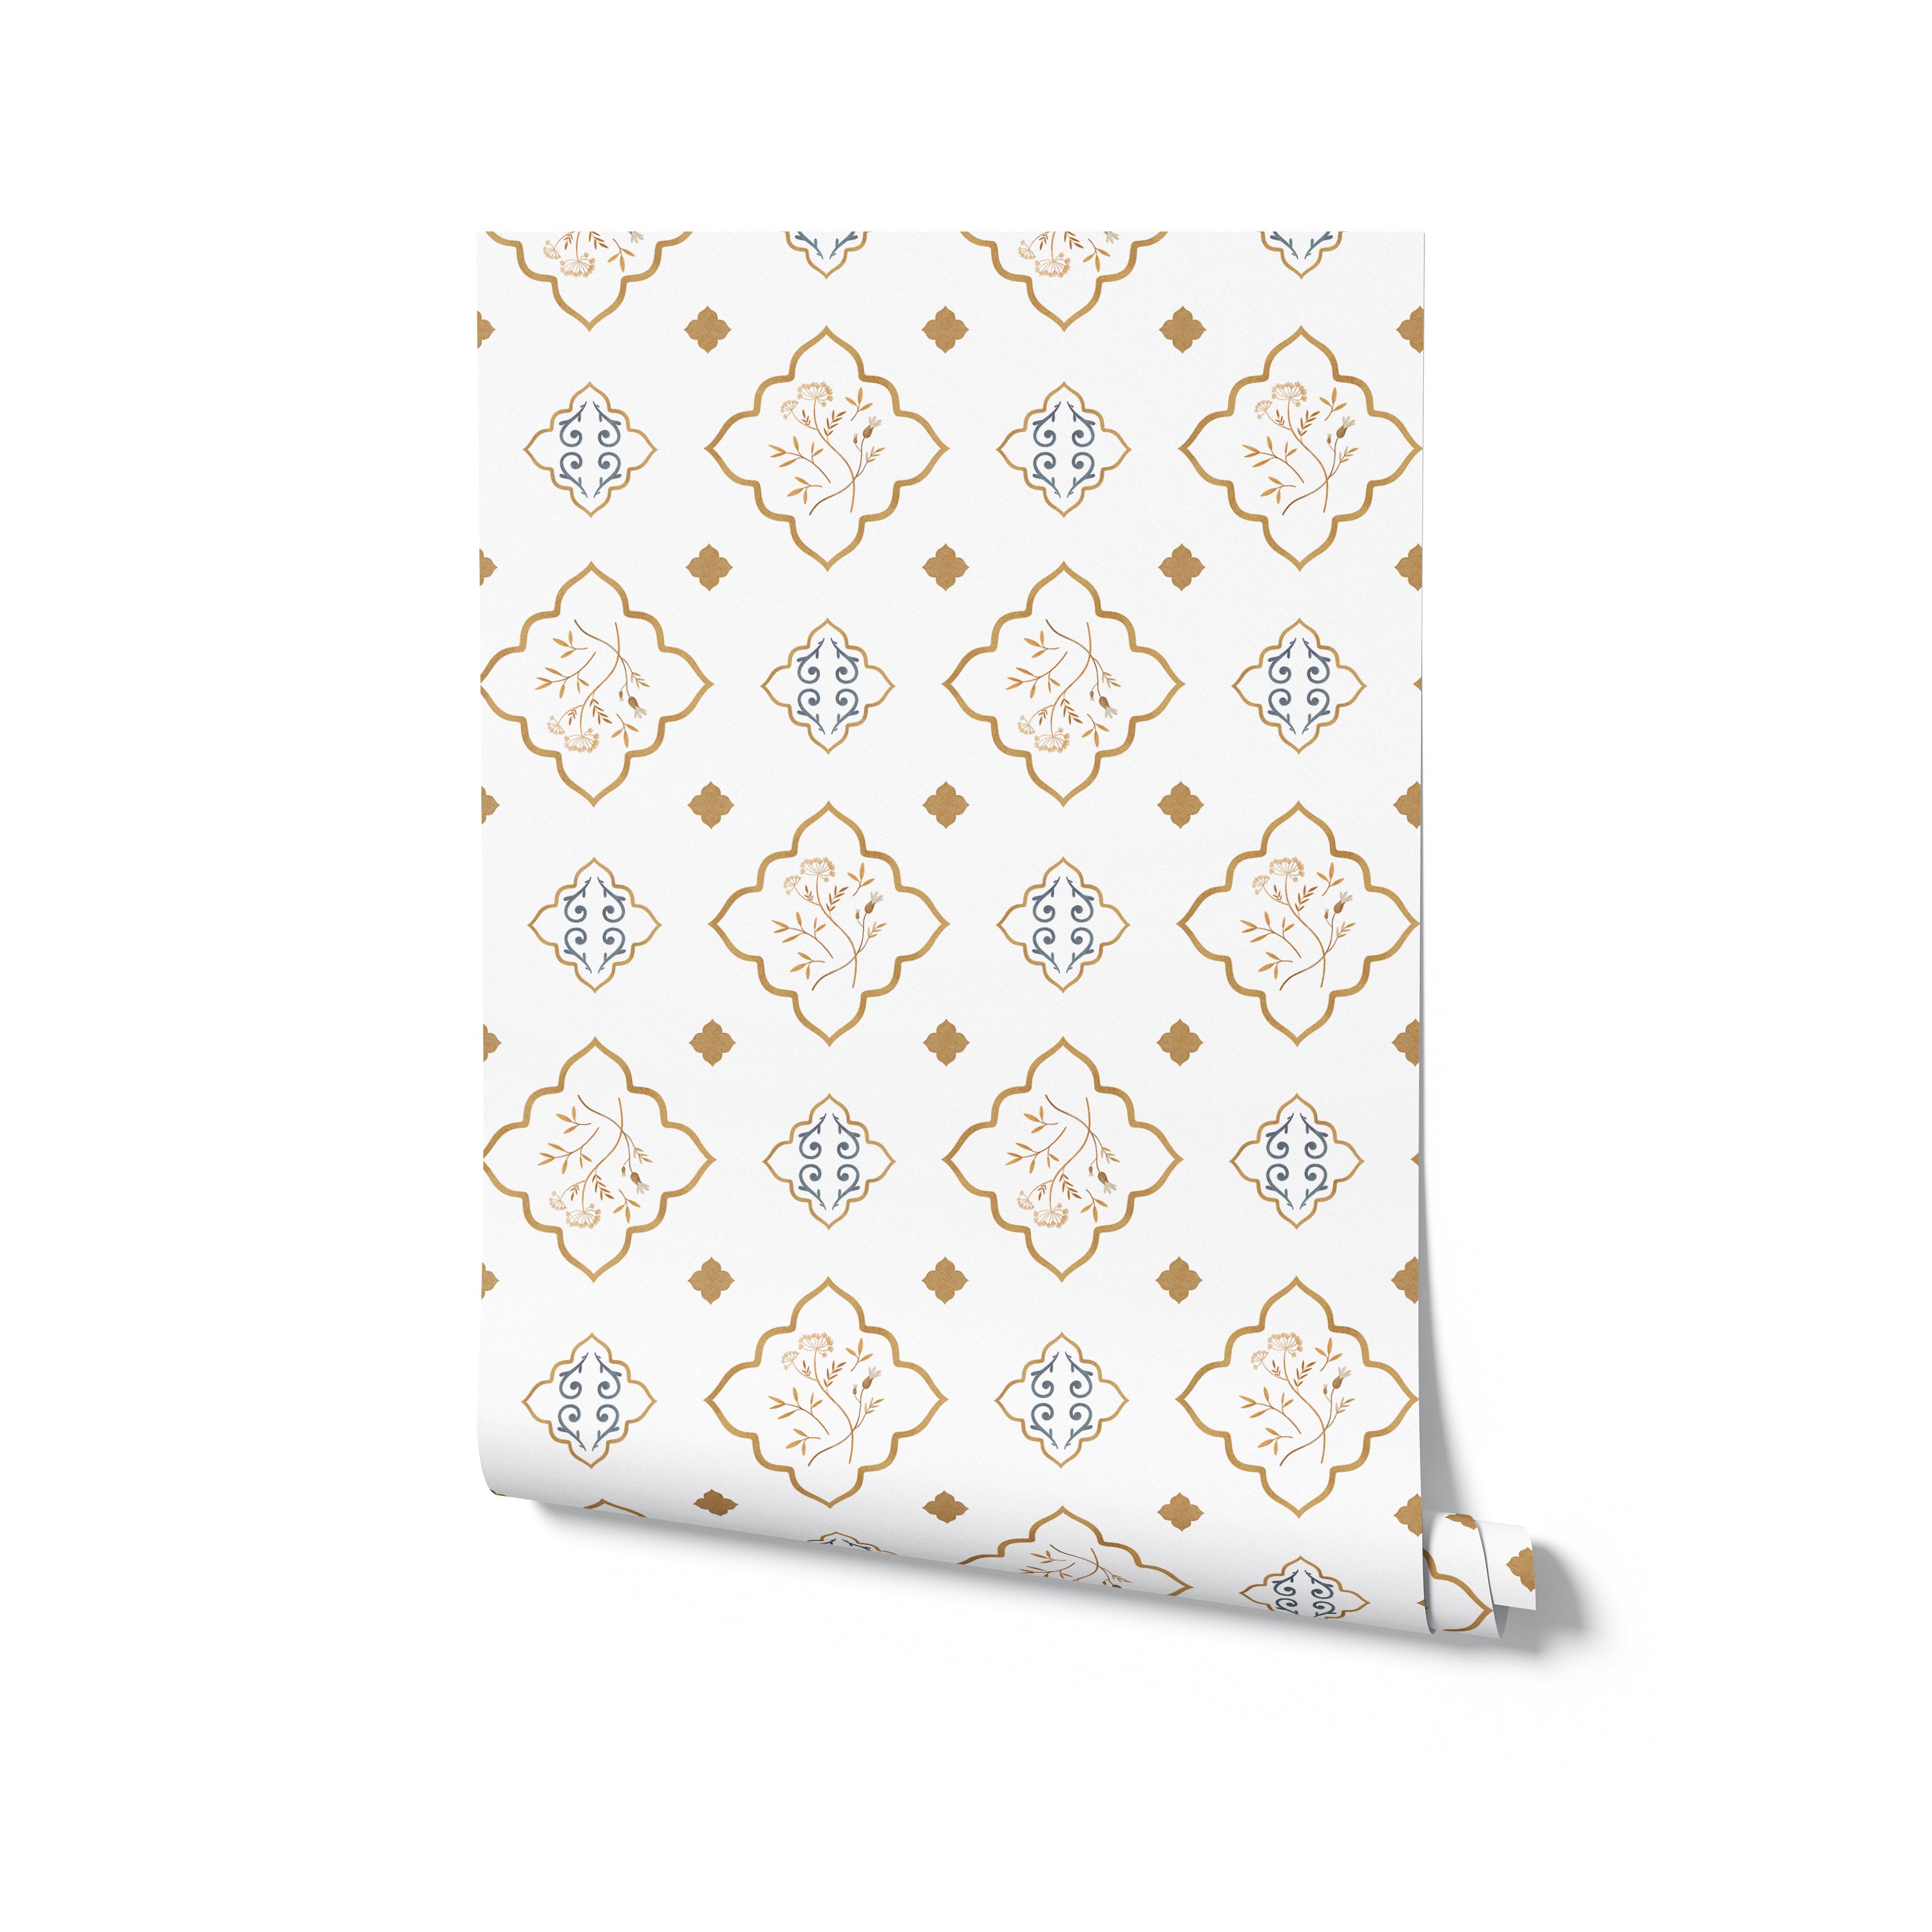 A roll of Moroccan Dream Wallpaper featuring an elegant design of gold and beige geometric patterns interlaced with floral and blue decorative elements.